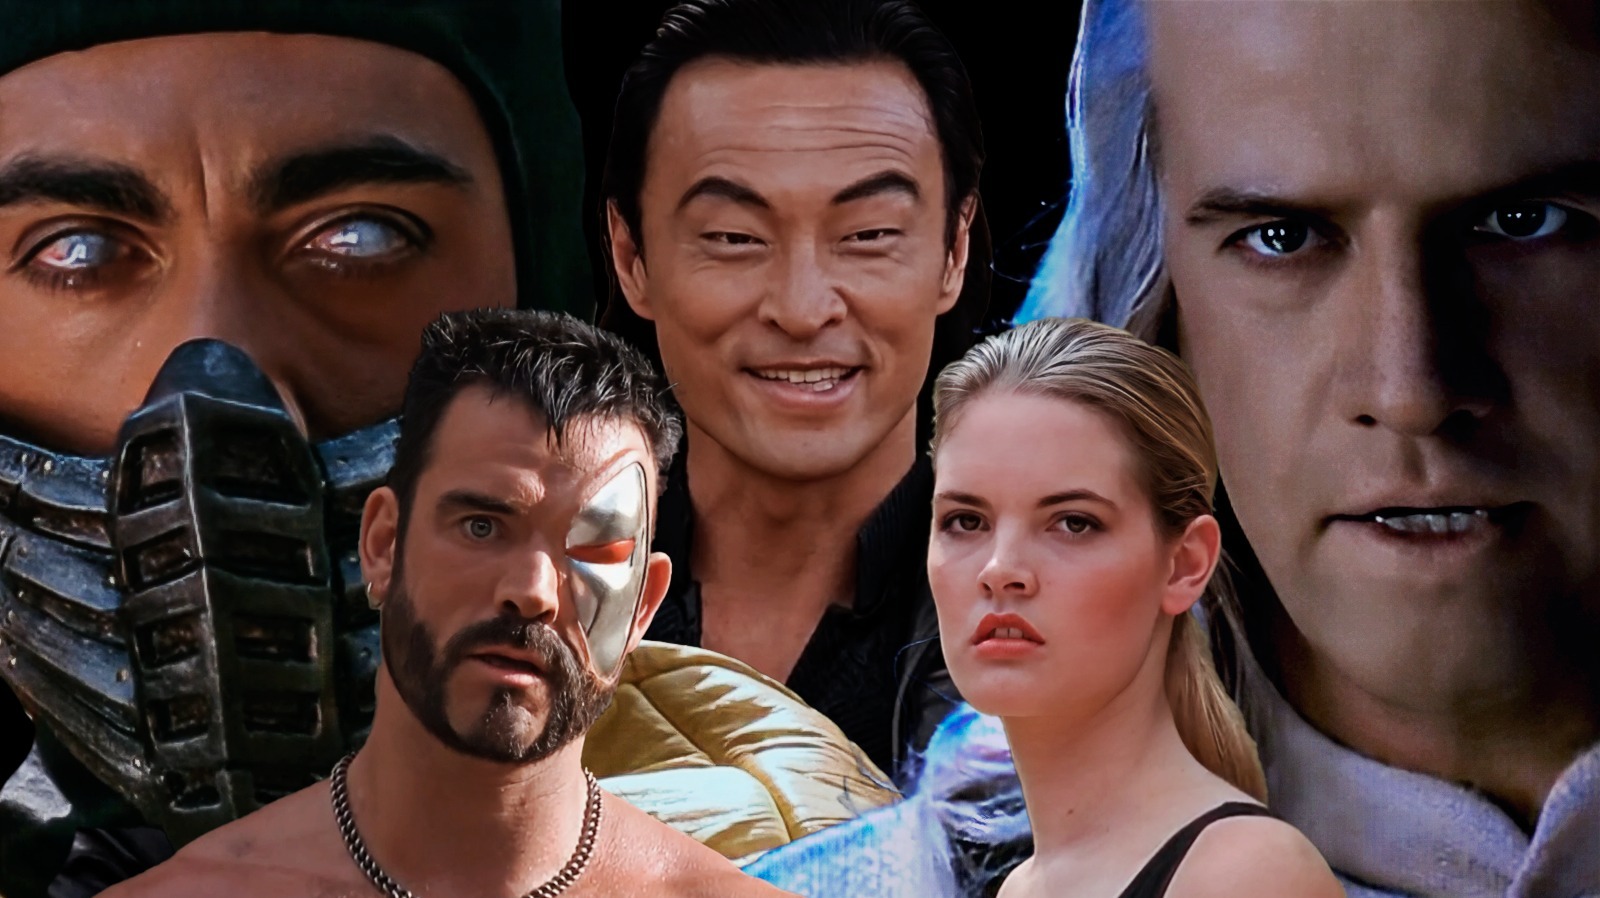 Mortal Kombat: Here Is the Cast of the New Movie